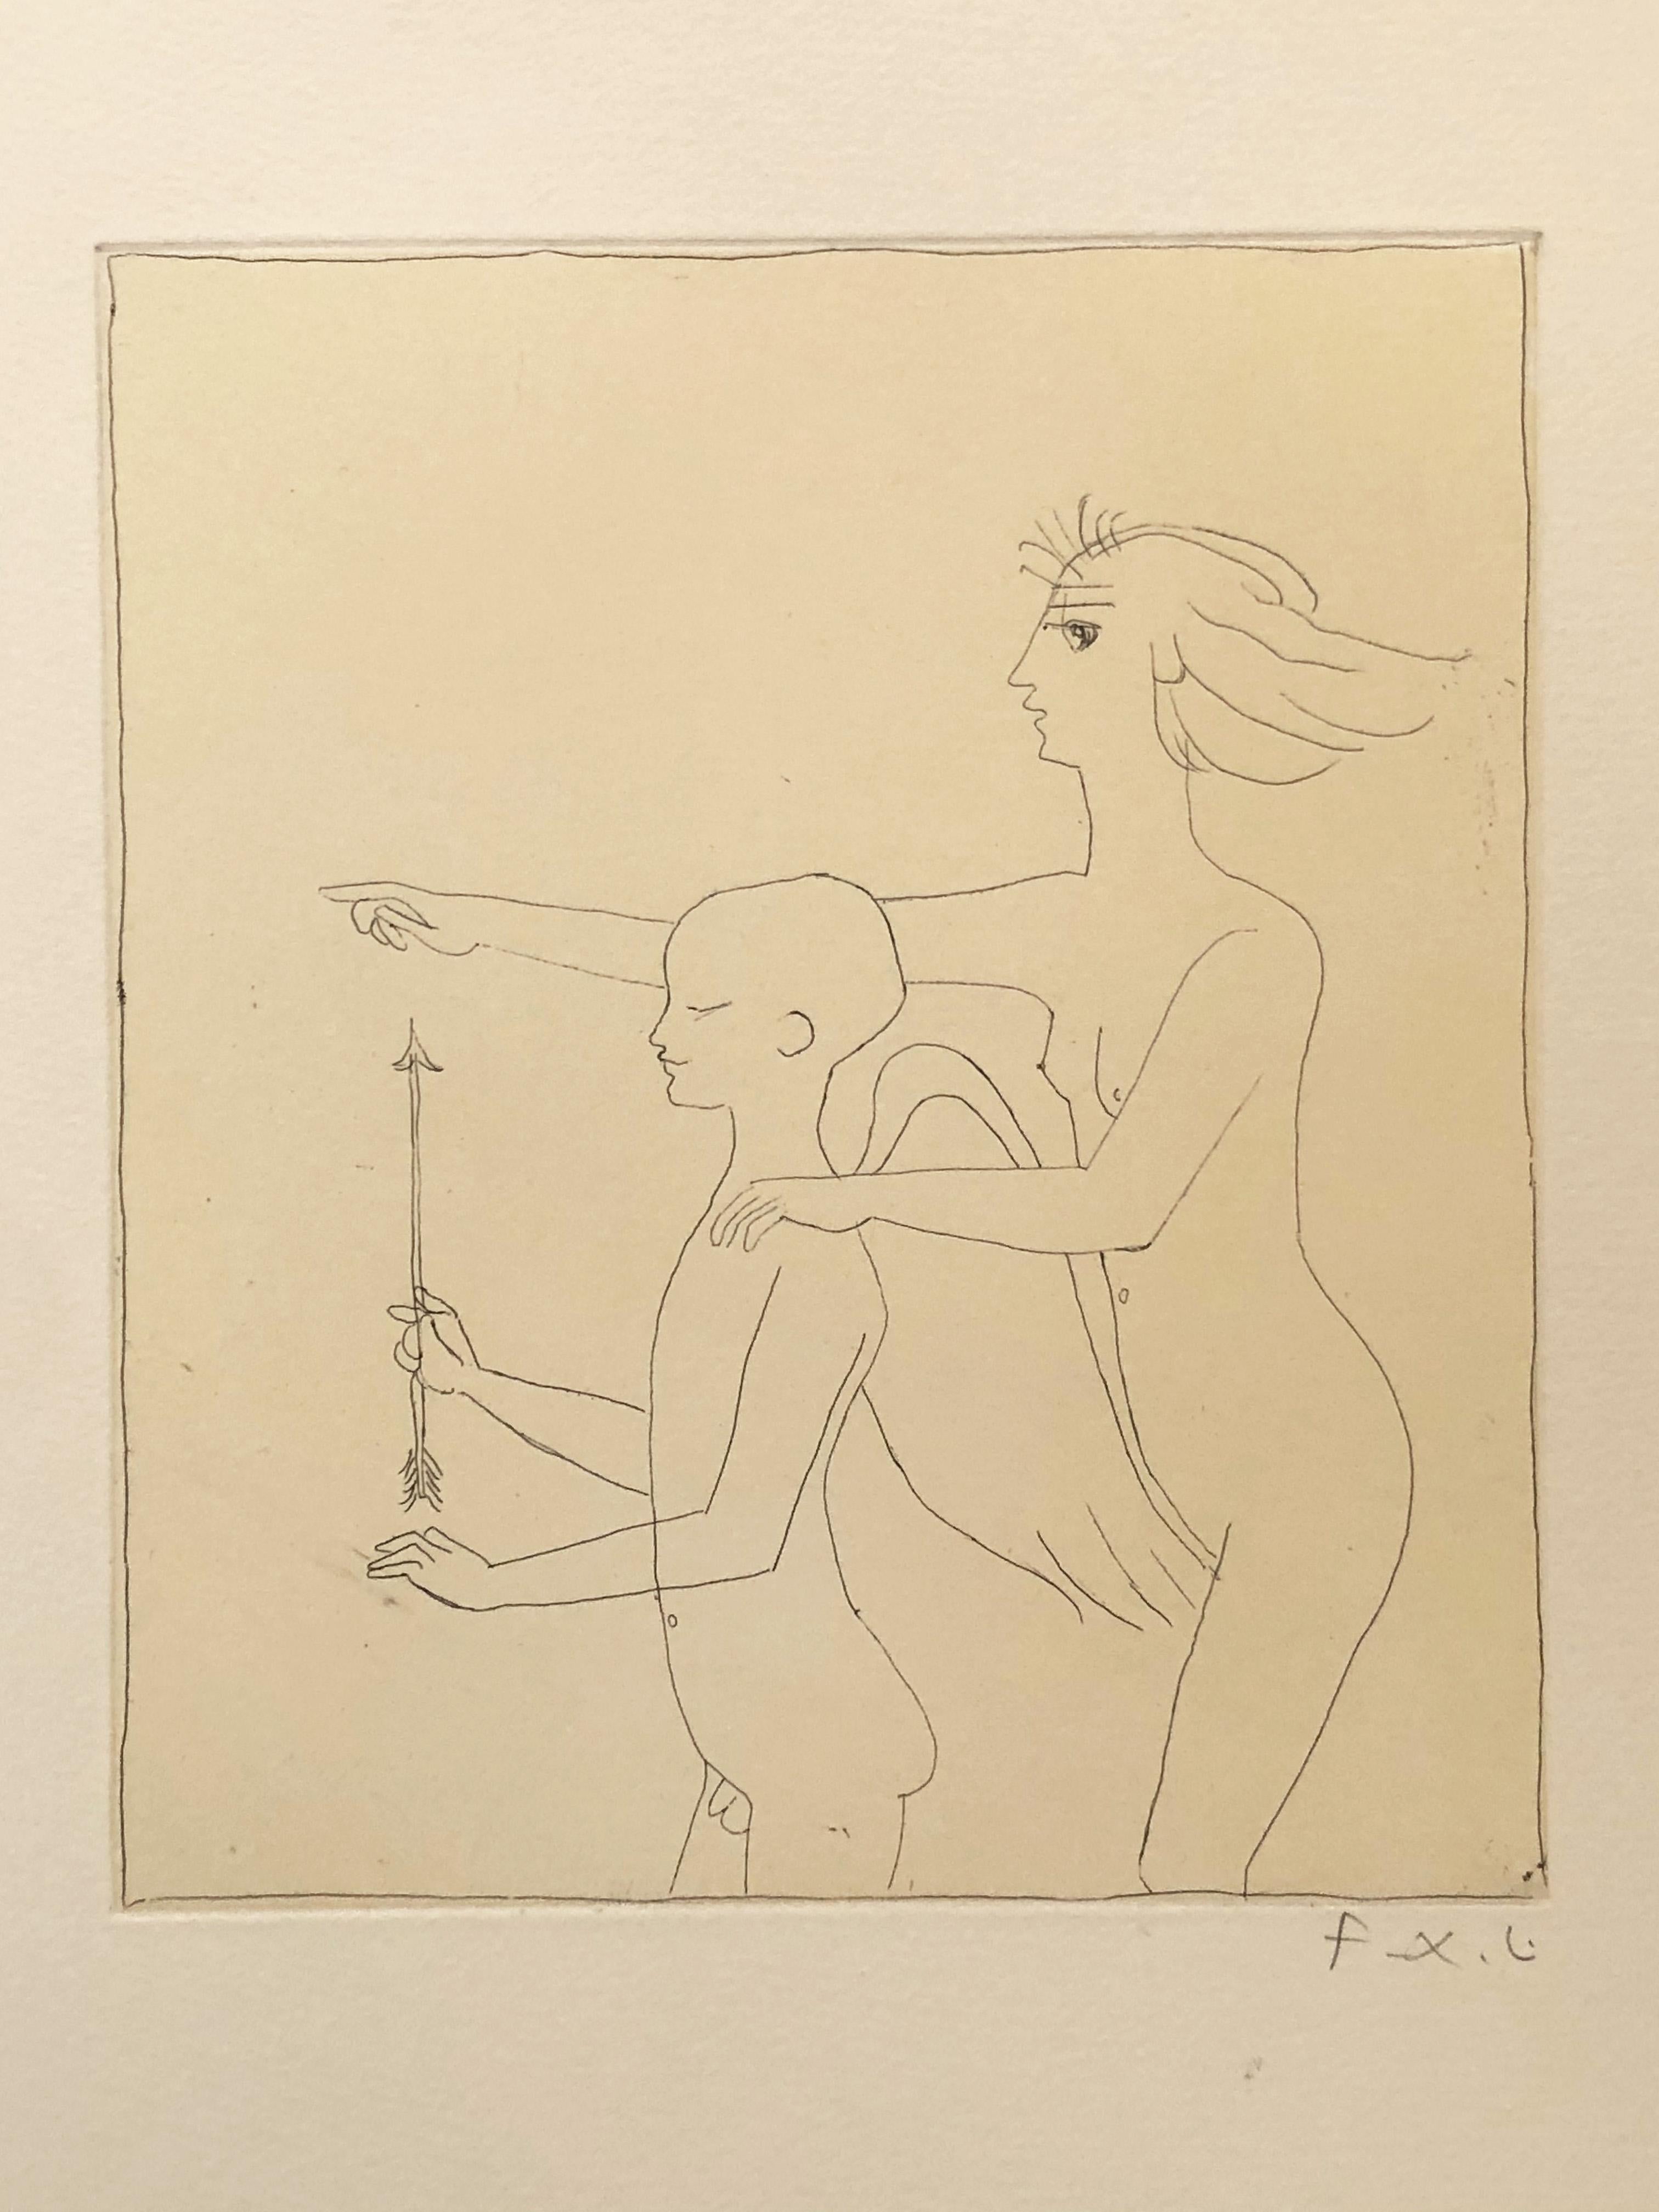 Francois-Xavier Lalanne (1927-2008) Allegory of Love, 2002
Techniques : etching on paper 
Hand signed in pencil by François Xavier Lalanne, in perfect condition


Dimensions of the paper : 38 x 28 cm (14,96 x 11 inches)
Dimensions of the etching